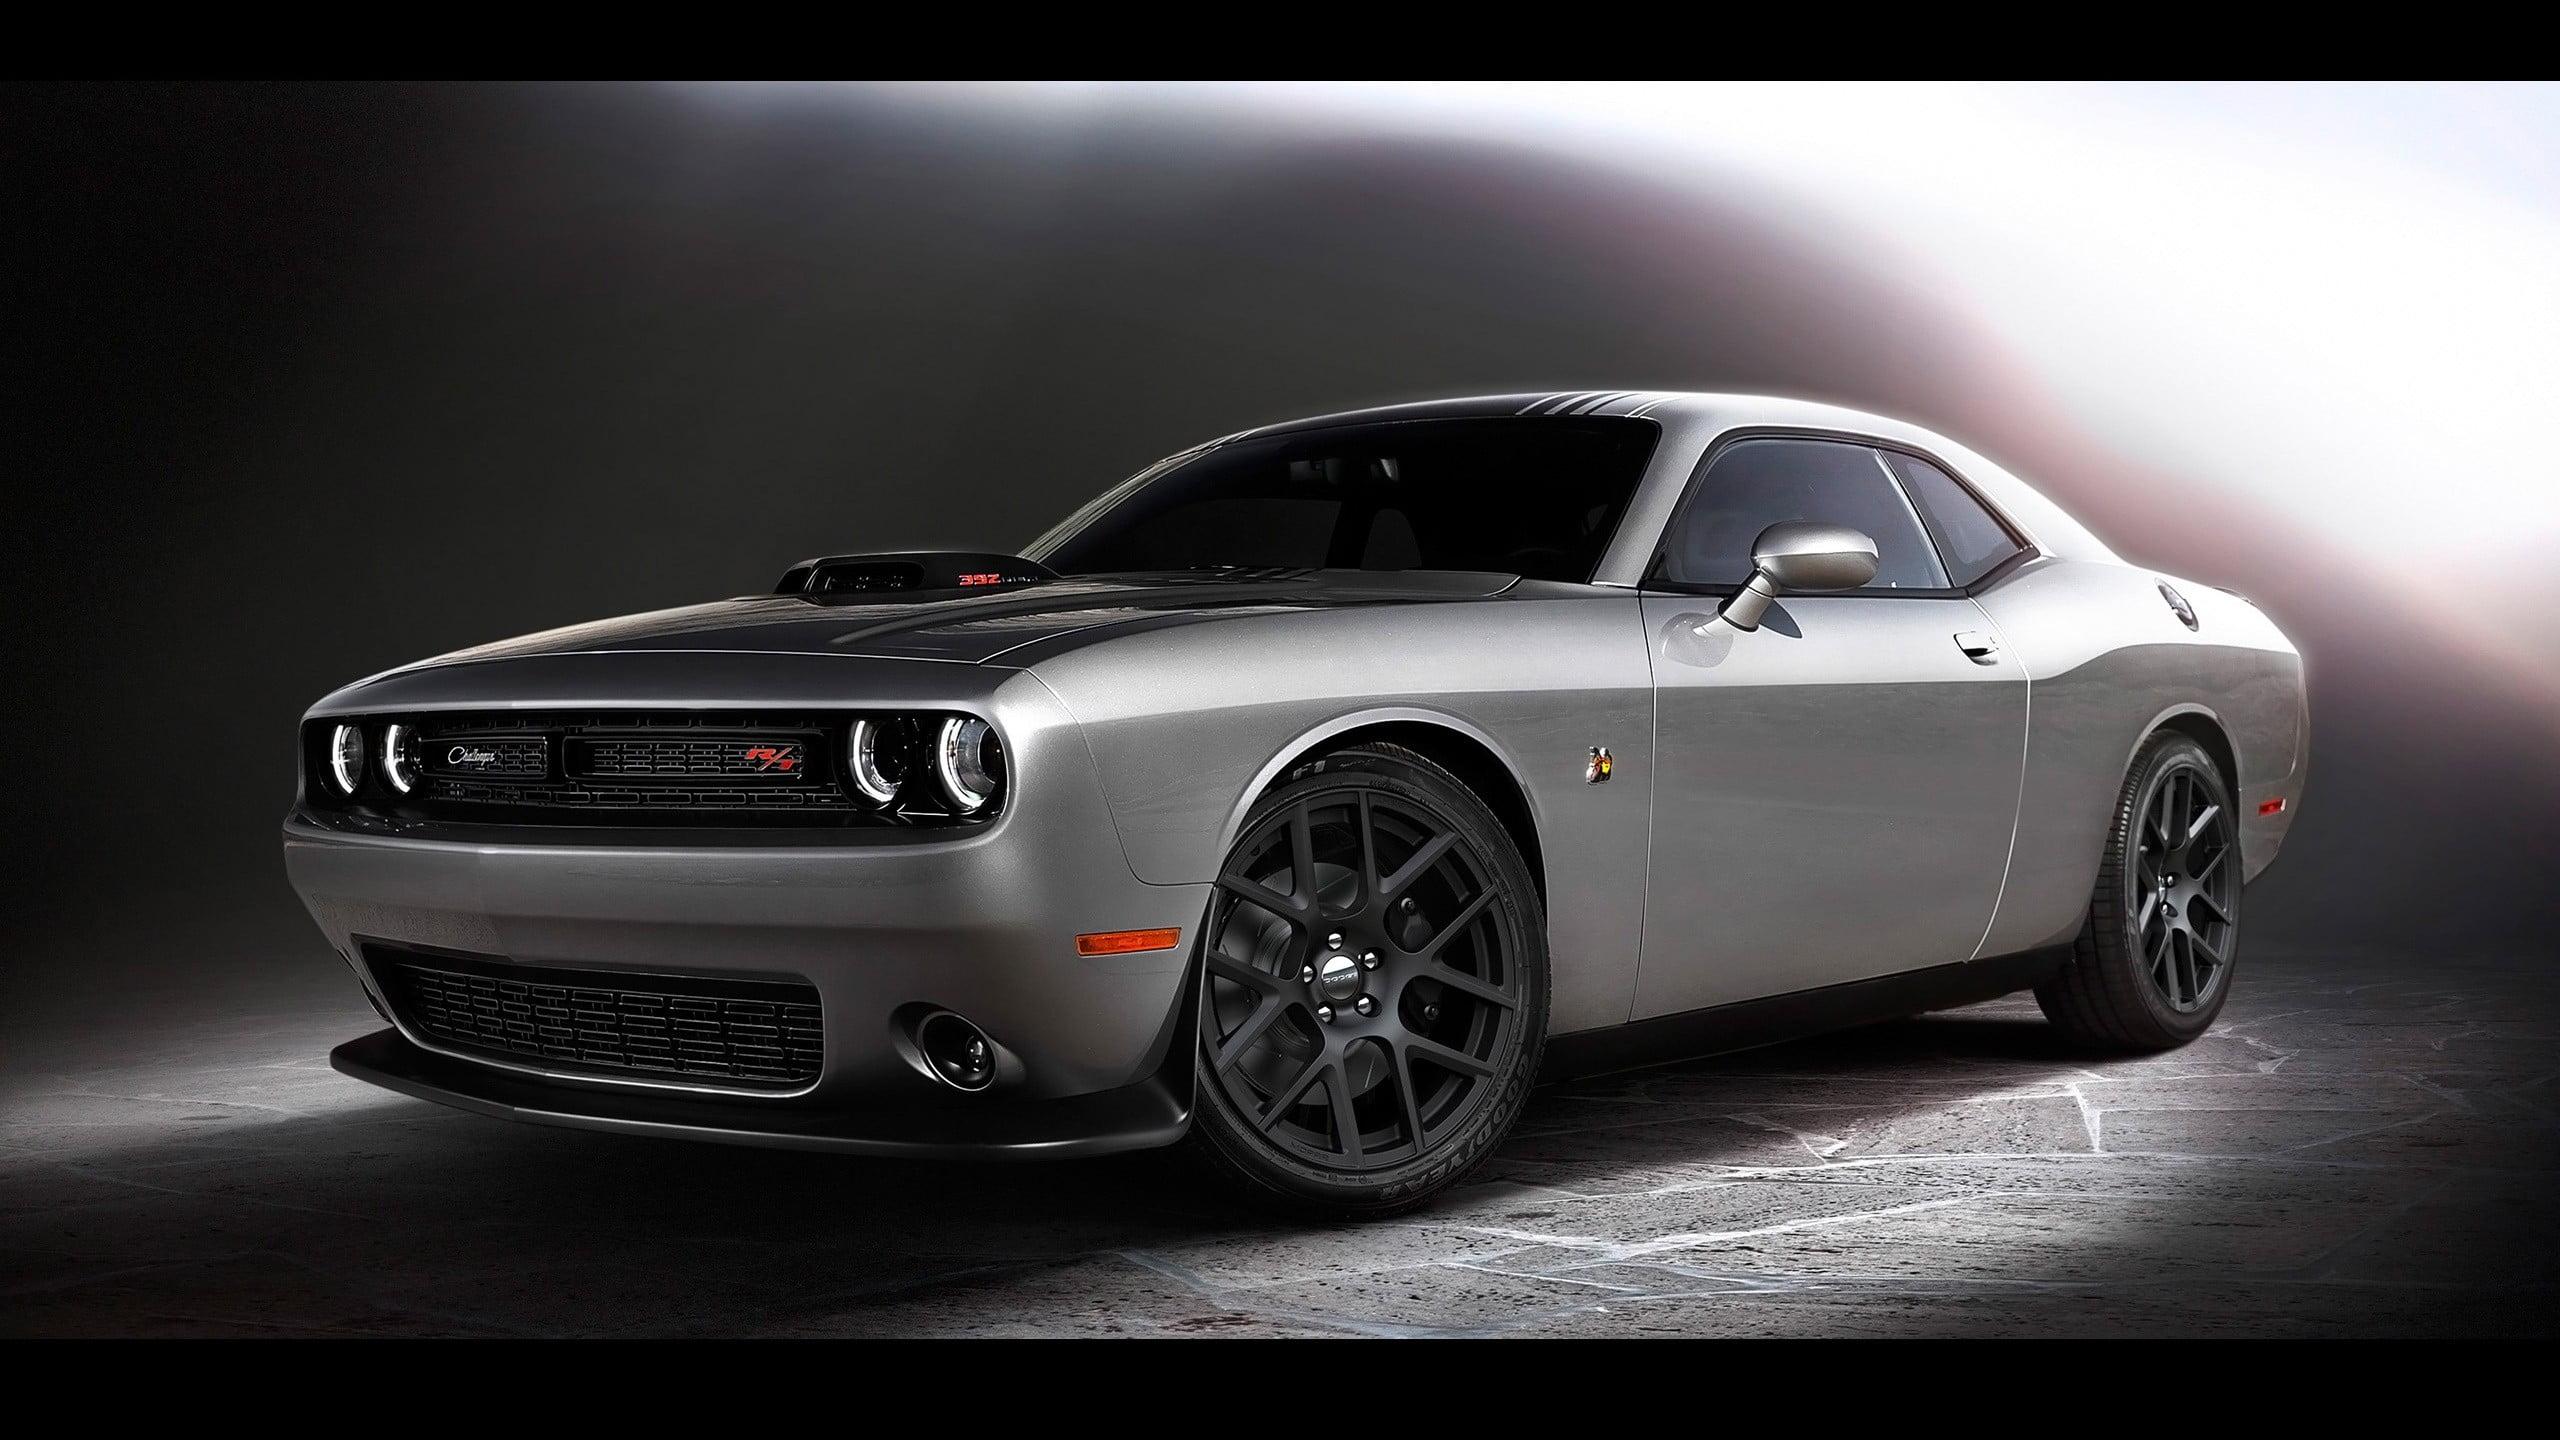 Gray and black Dodge Challenger HD wallpaper